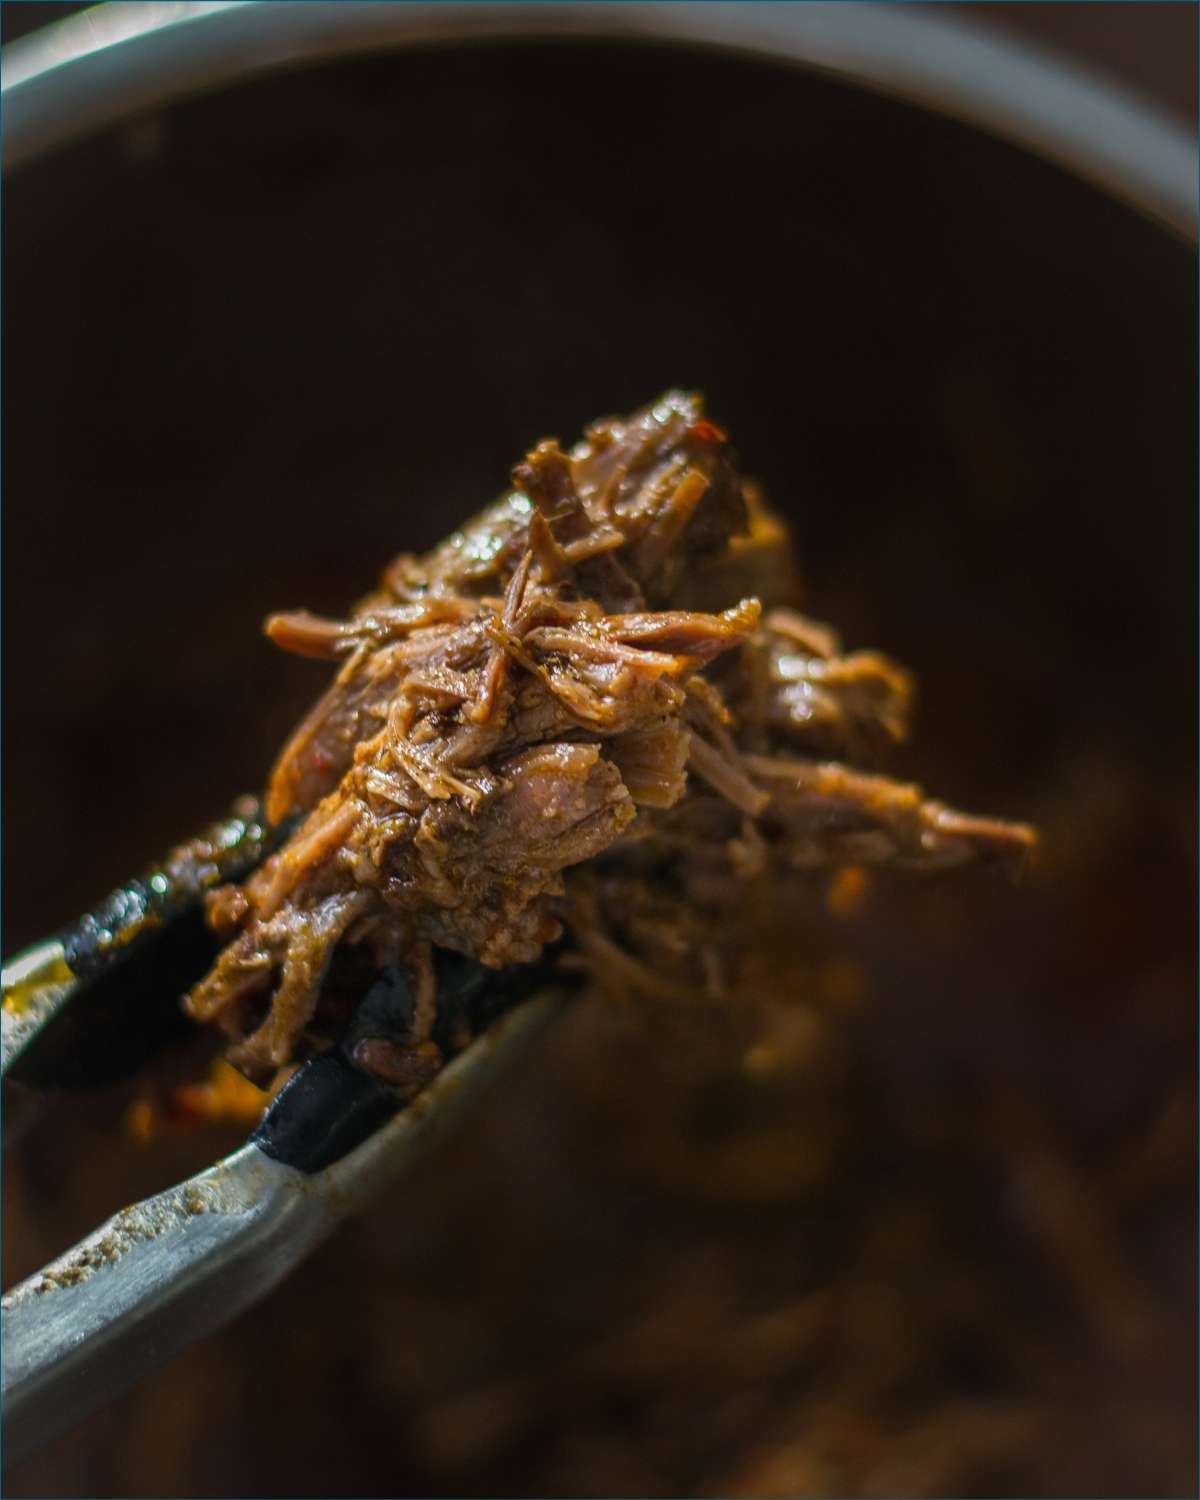 Instant Pot Camping Recipes this one with delicious pulled pork